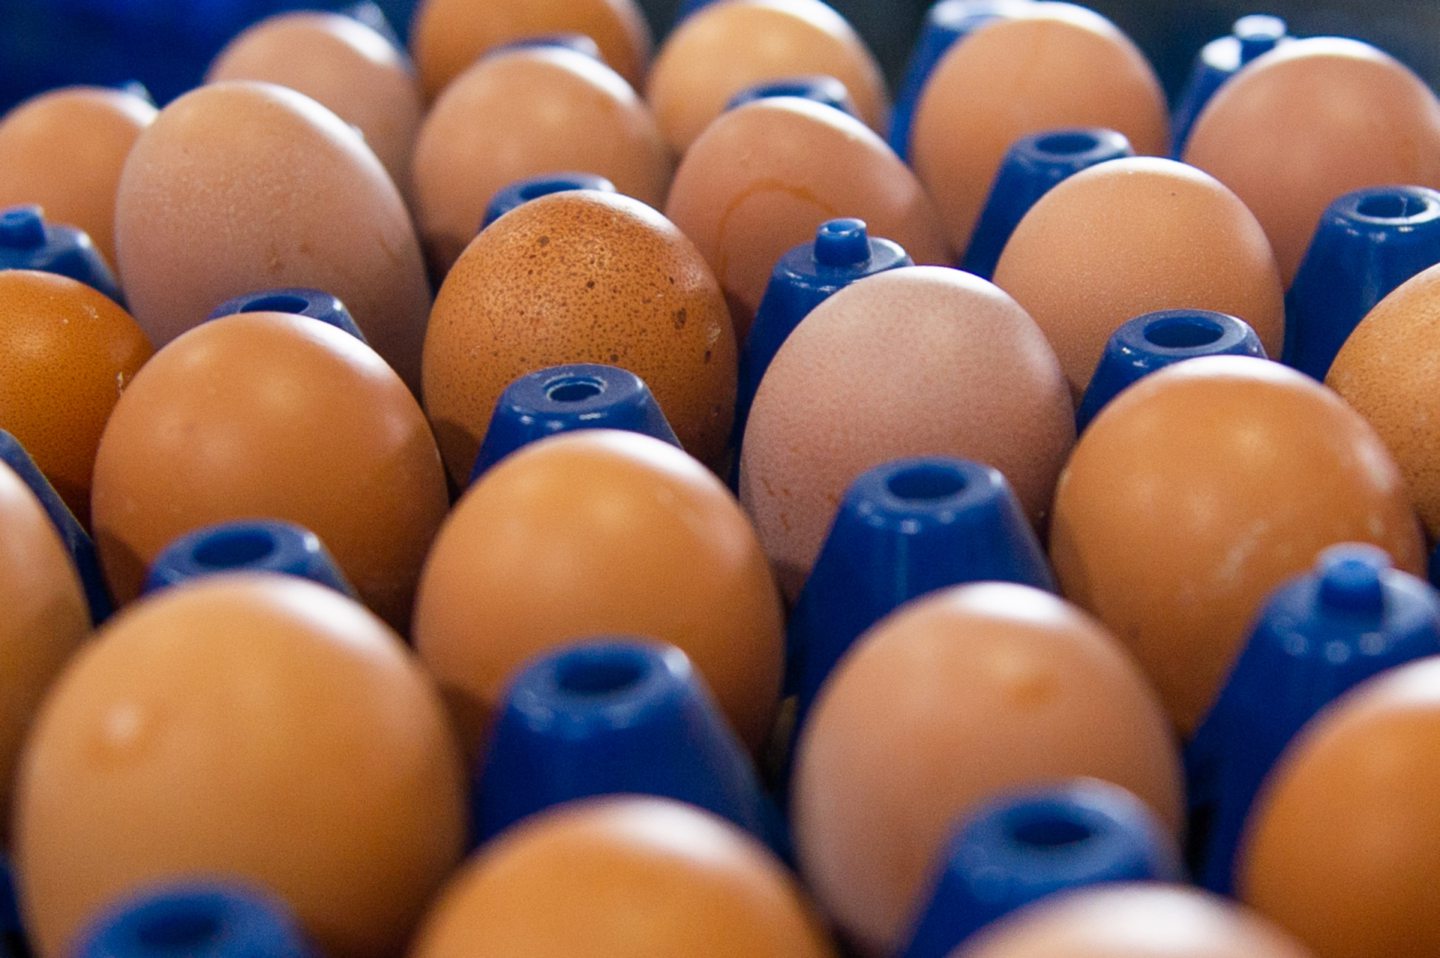 The UK often buys bird eggs from France as a result of longer breeding seasons and better weather